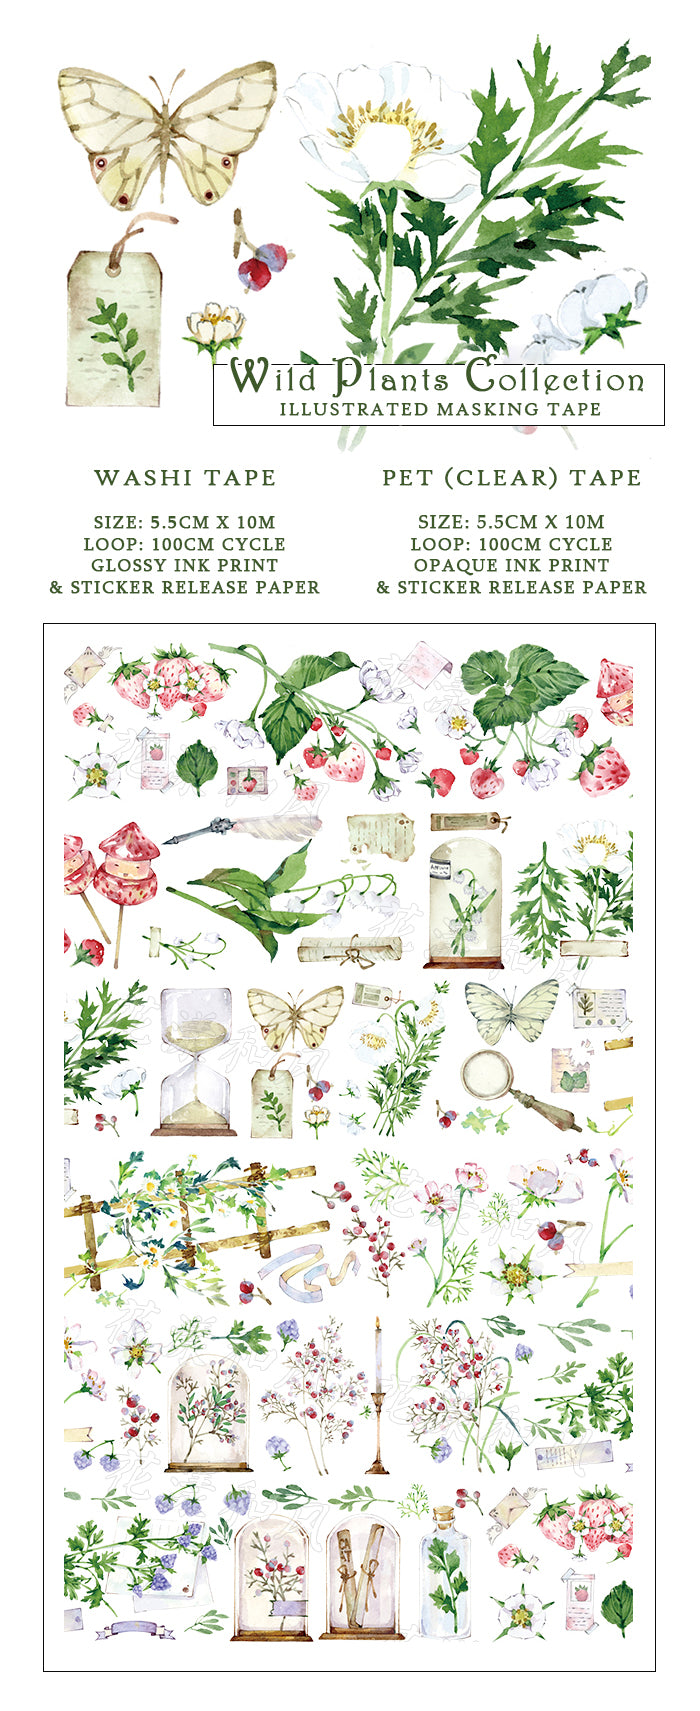 Wild Plants Collection Masking Tape